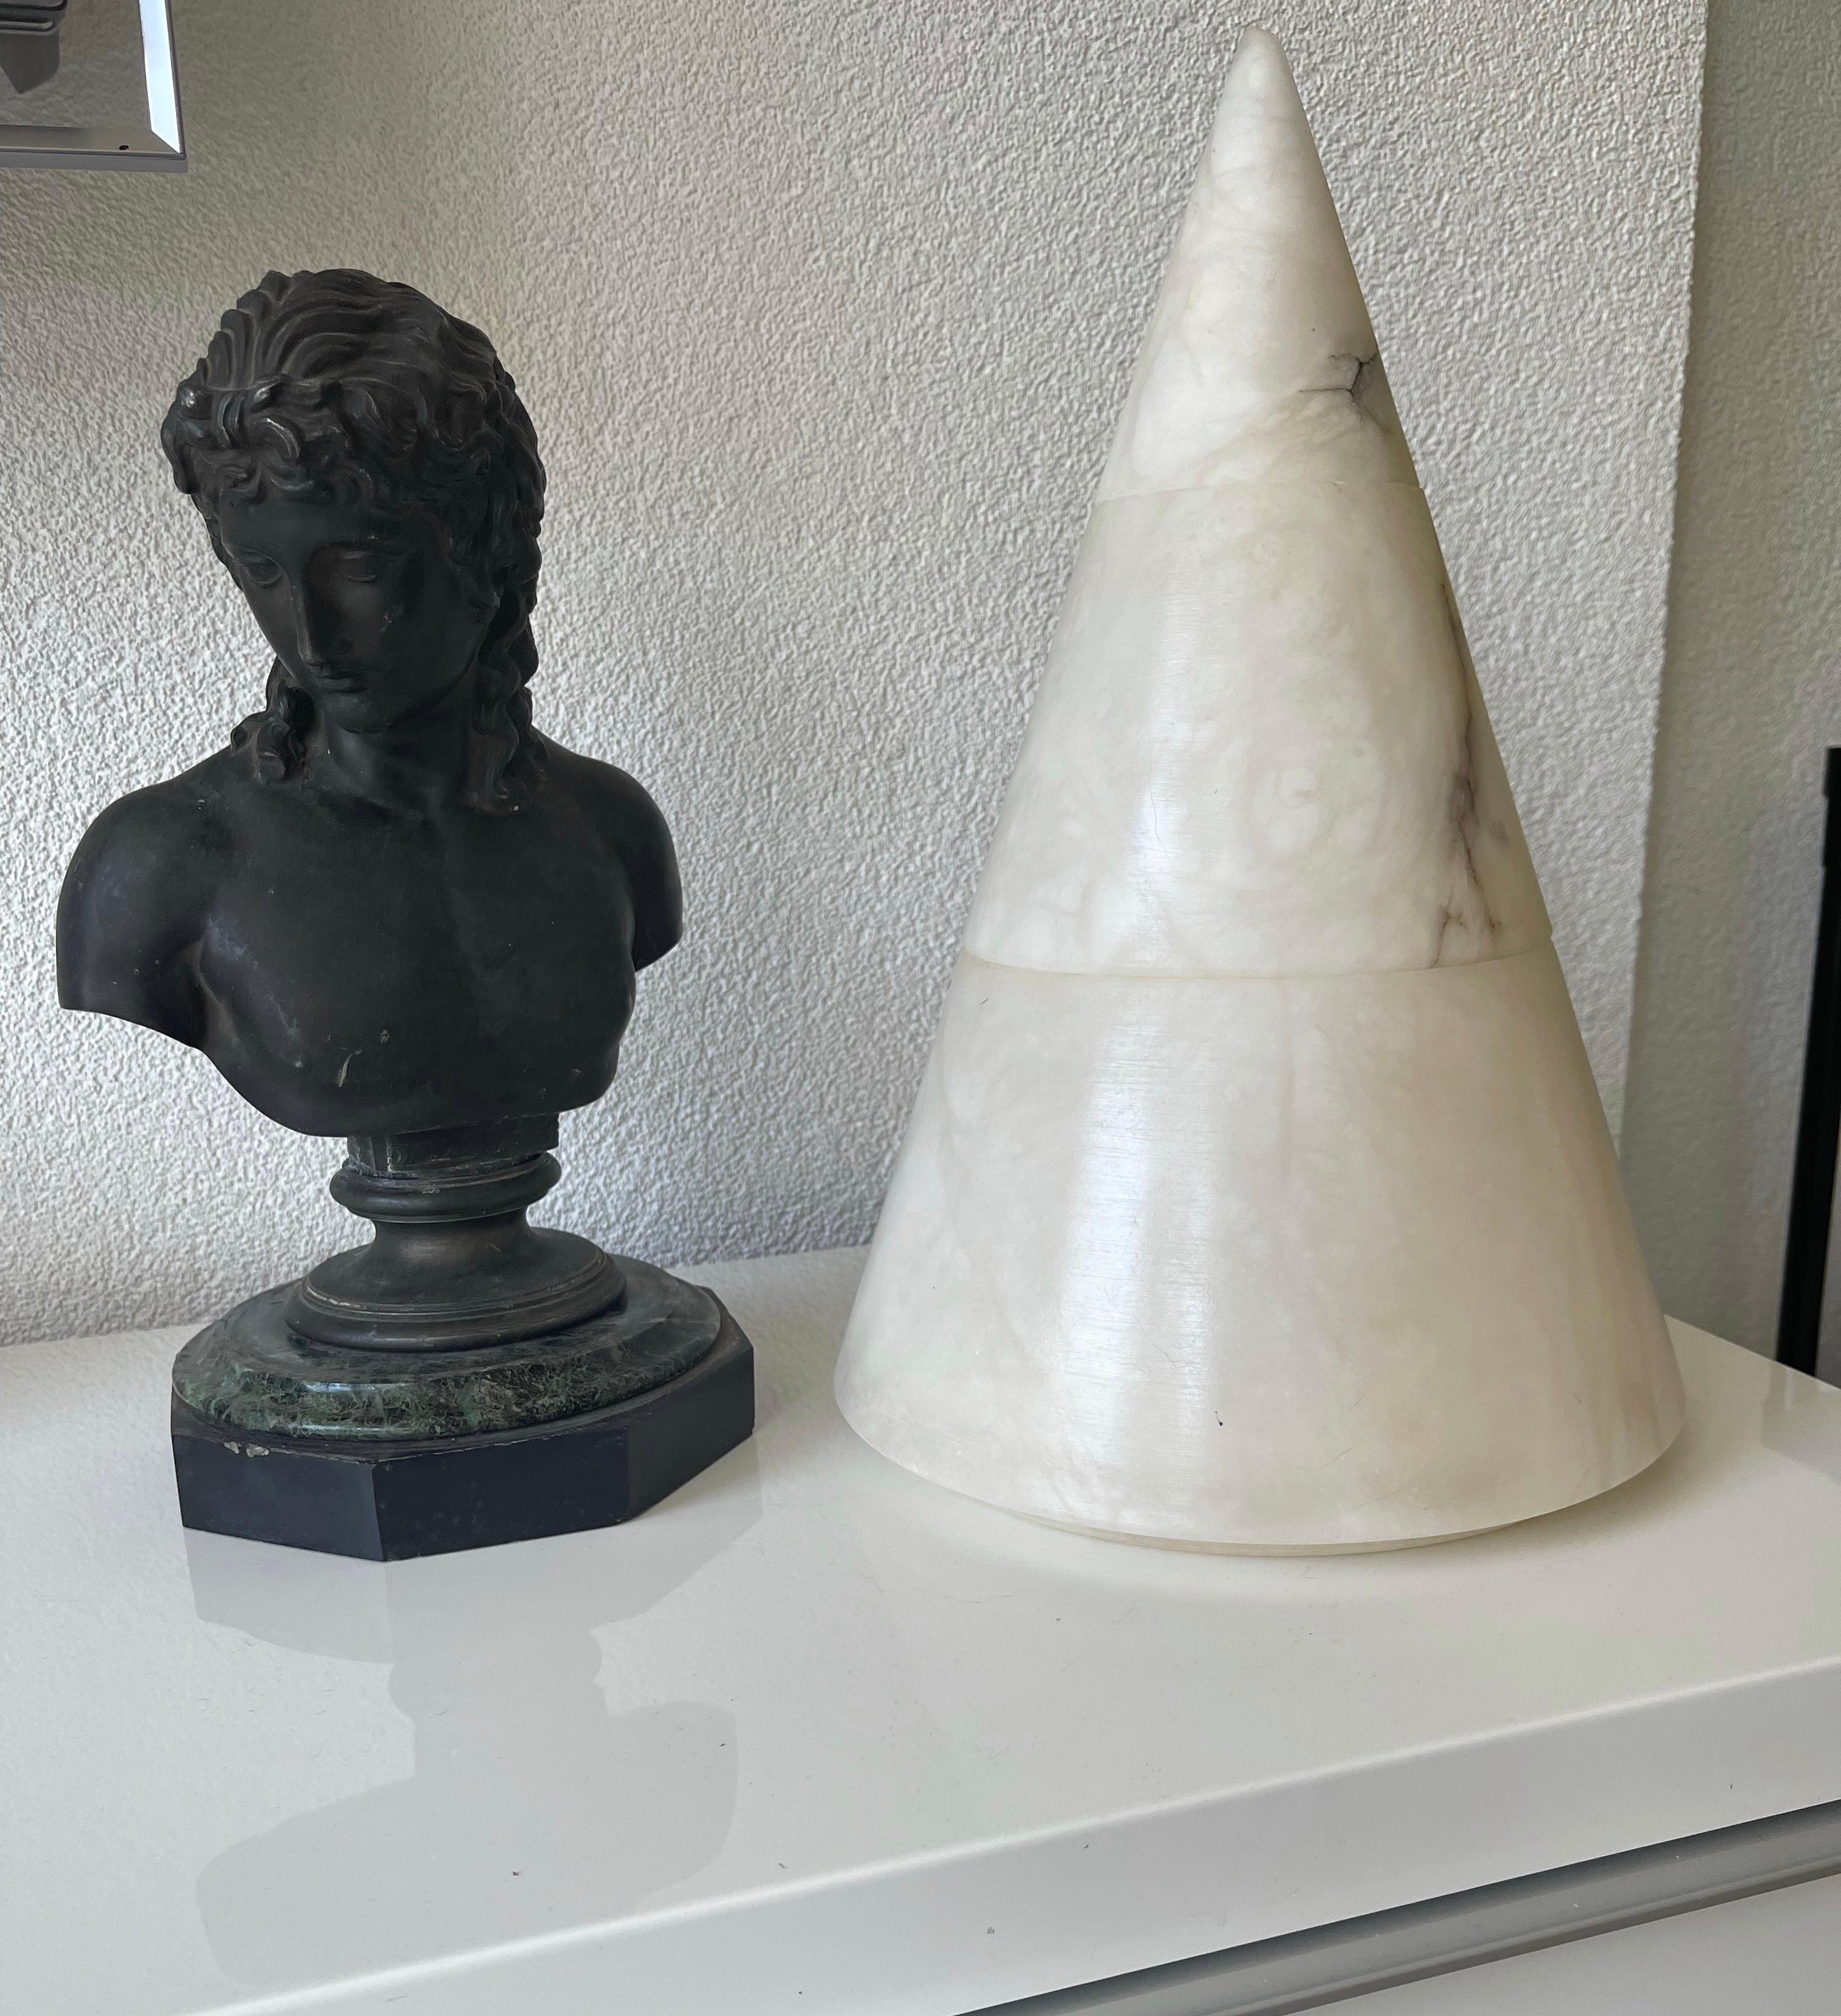 Stylish mineral stone 1970s table lamp of a slightly different color.

We decided to publish this second conical shape alabaster table lamp separately, because it is just slightly different in color than the one we offered in our gallery about one